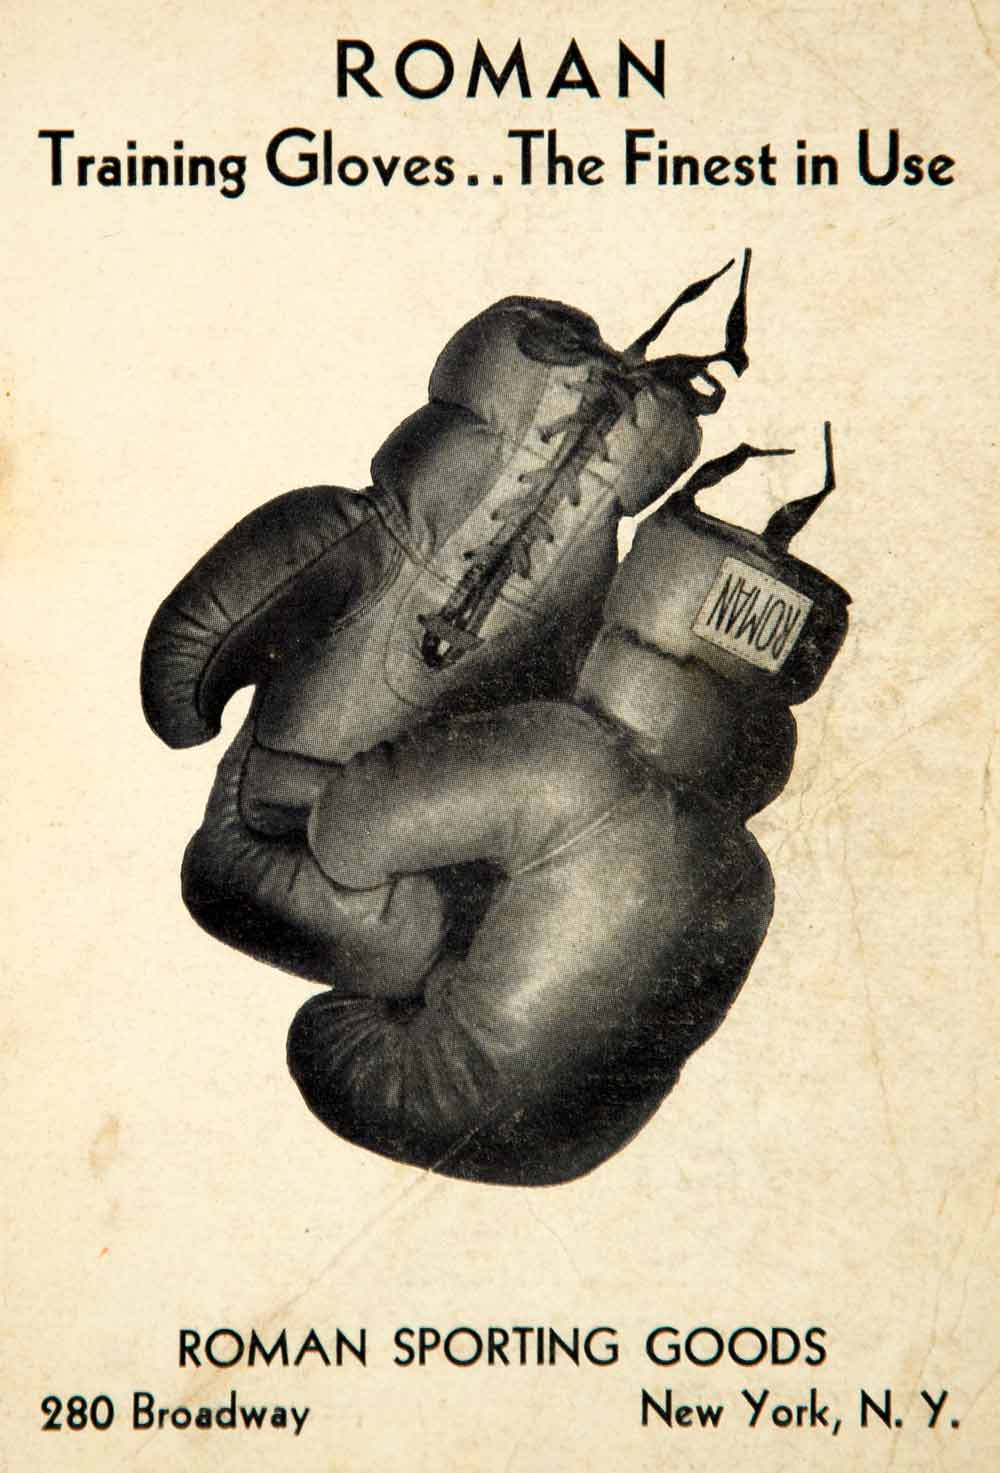 1936 Ad Roman Sporting Goods 280 Broadway NY Boxing Training Gloves YPBR1